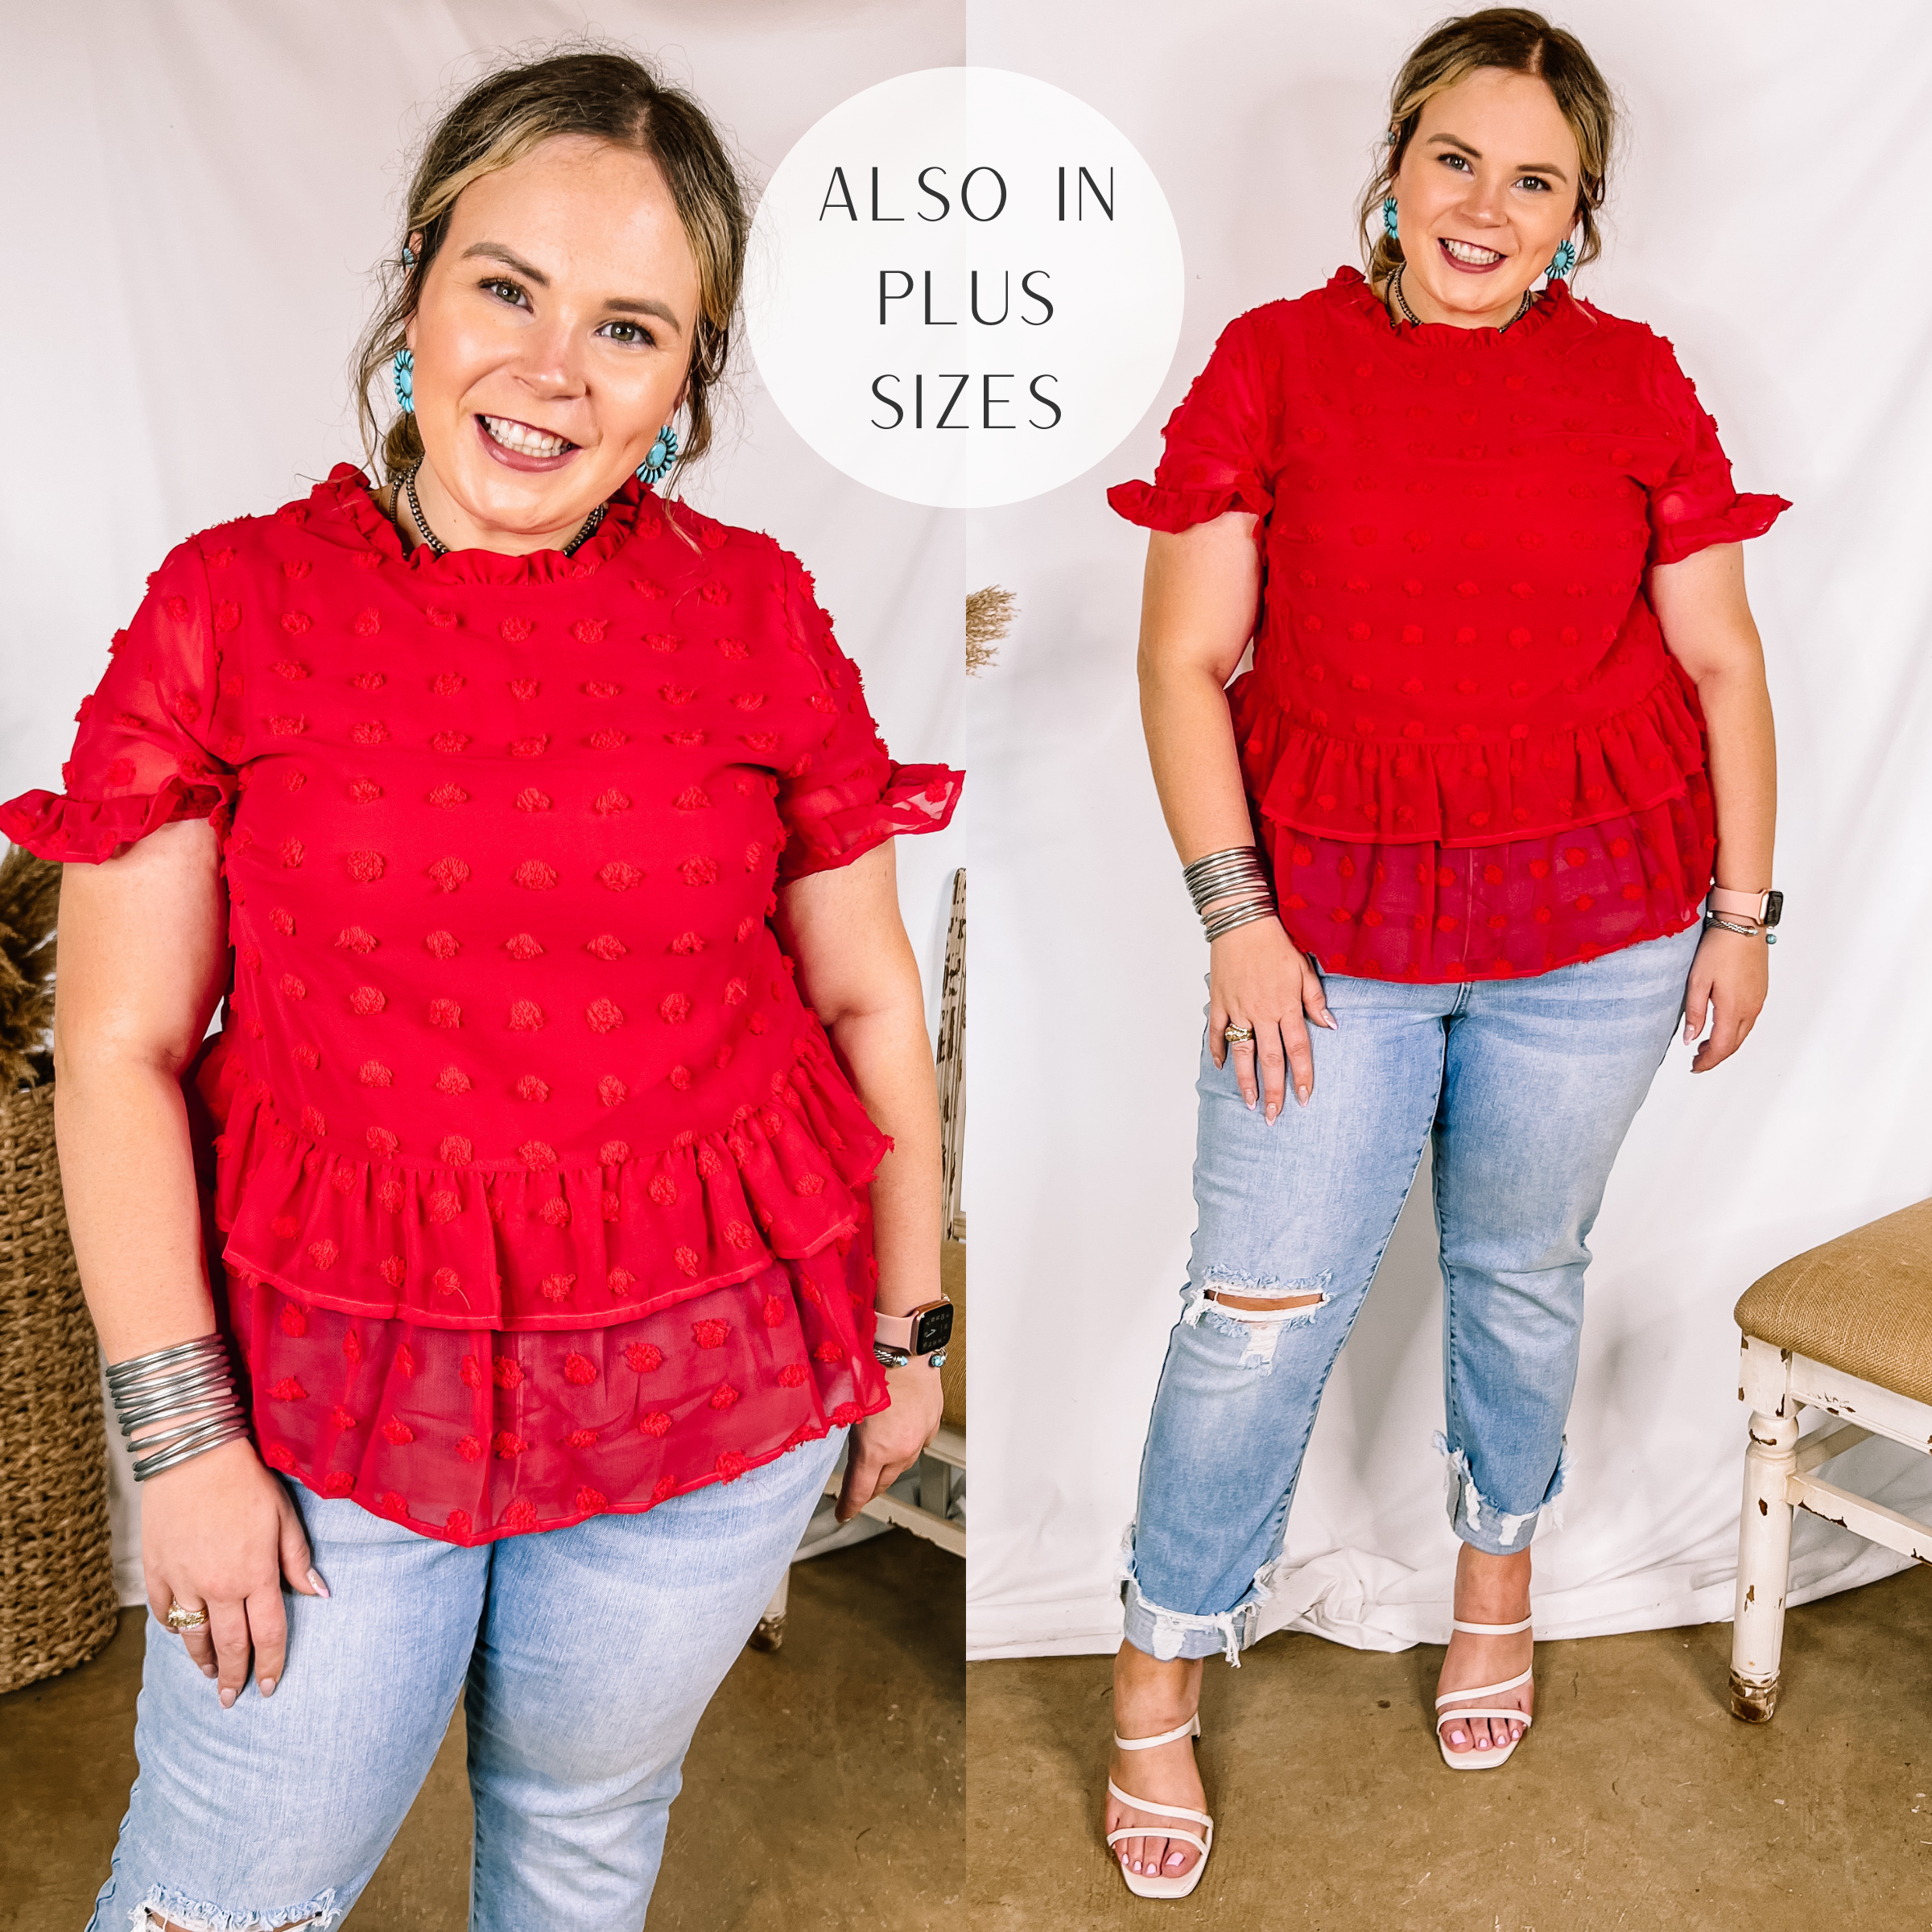 Model is wearing a red peplum blouse with a swiss dot pattern. Model has it paired with distressed light wash jeans, white strappy heels, and sterling silver jewelry.